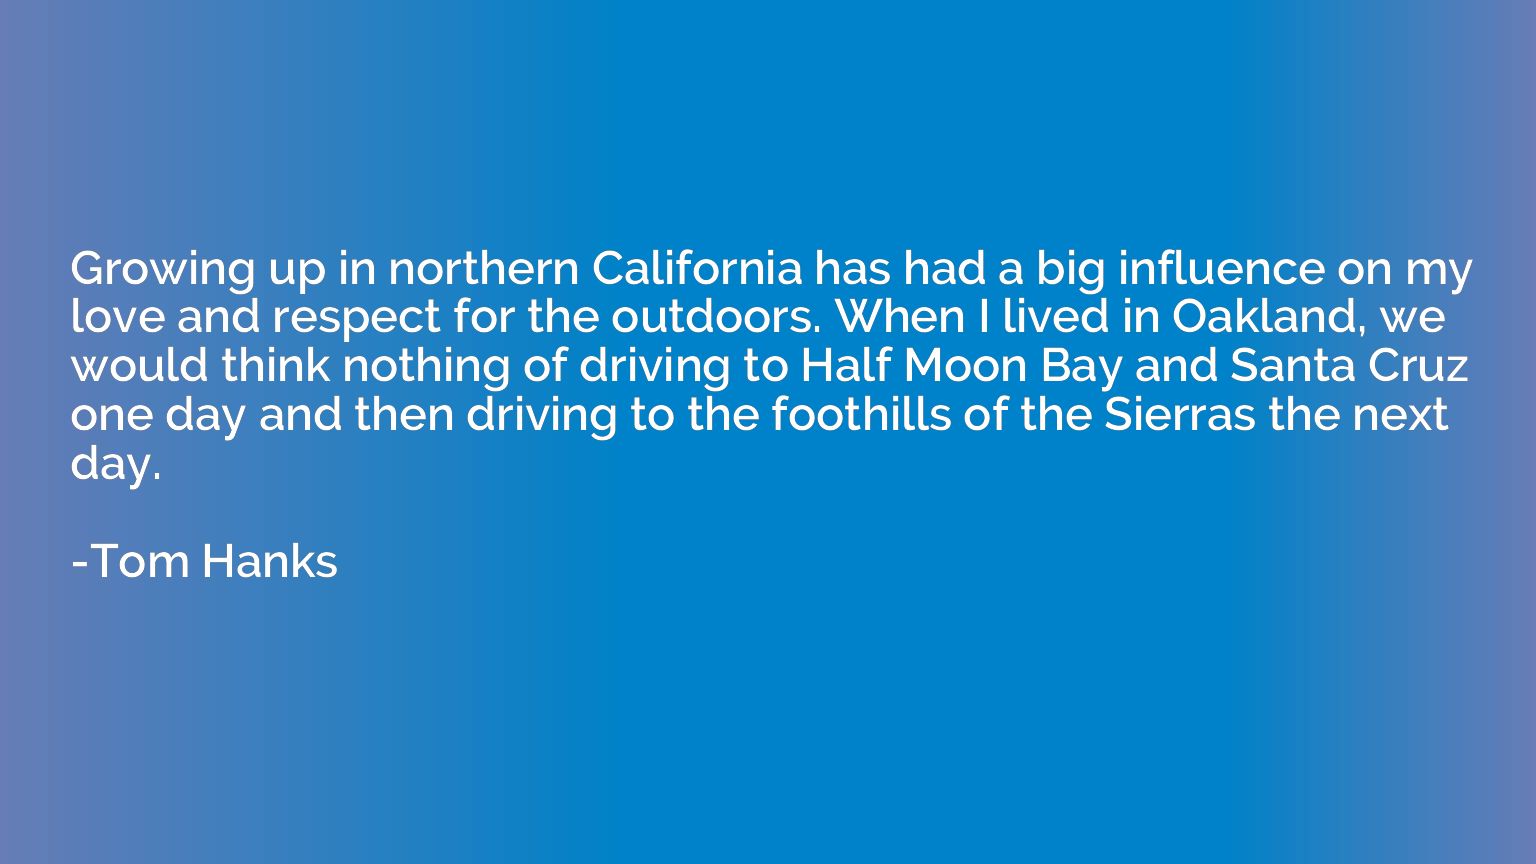 Growing up in northern California has had a big influence on